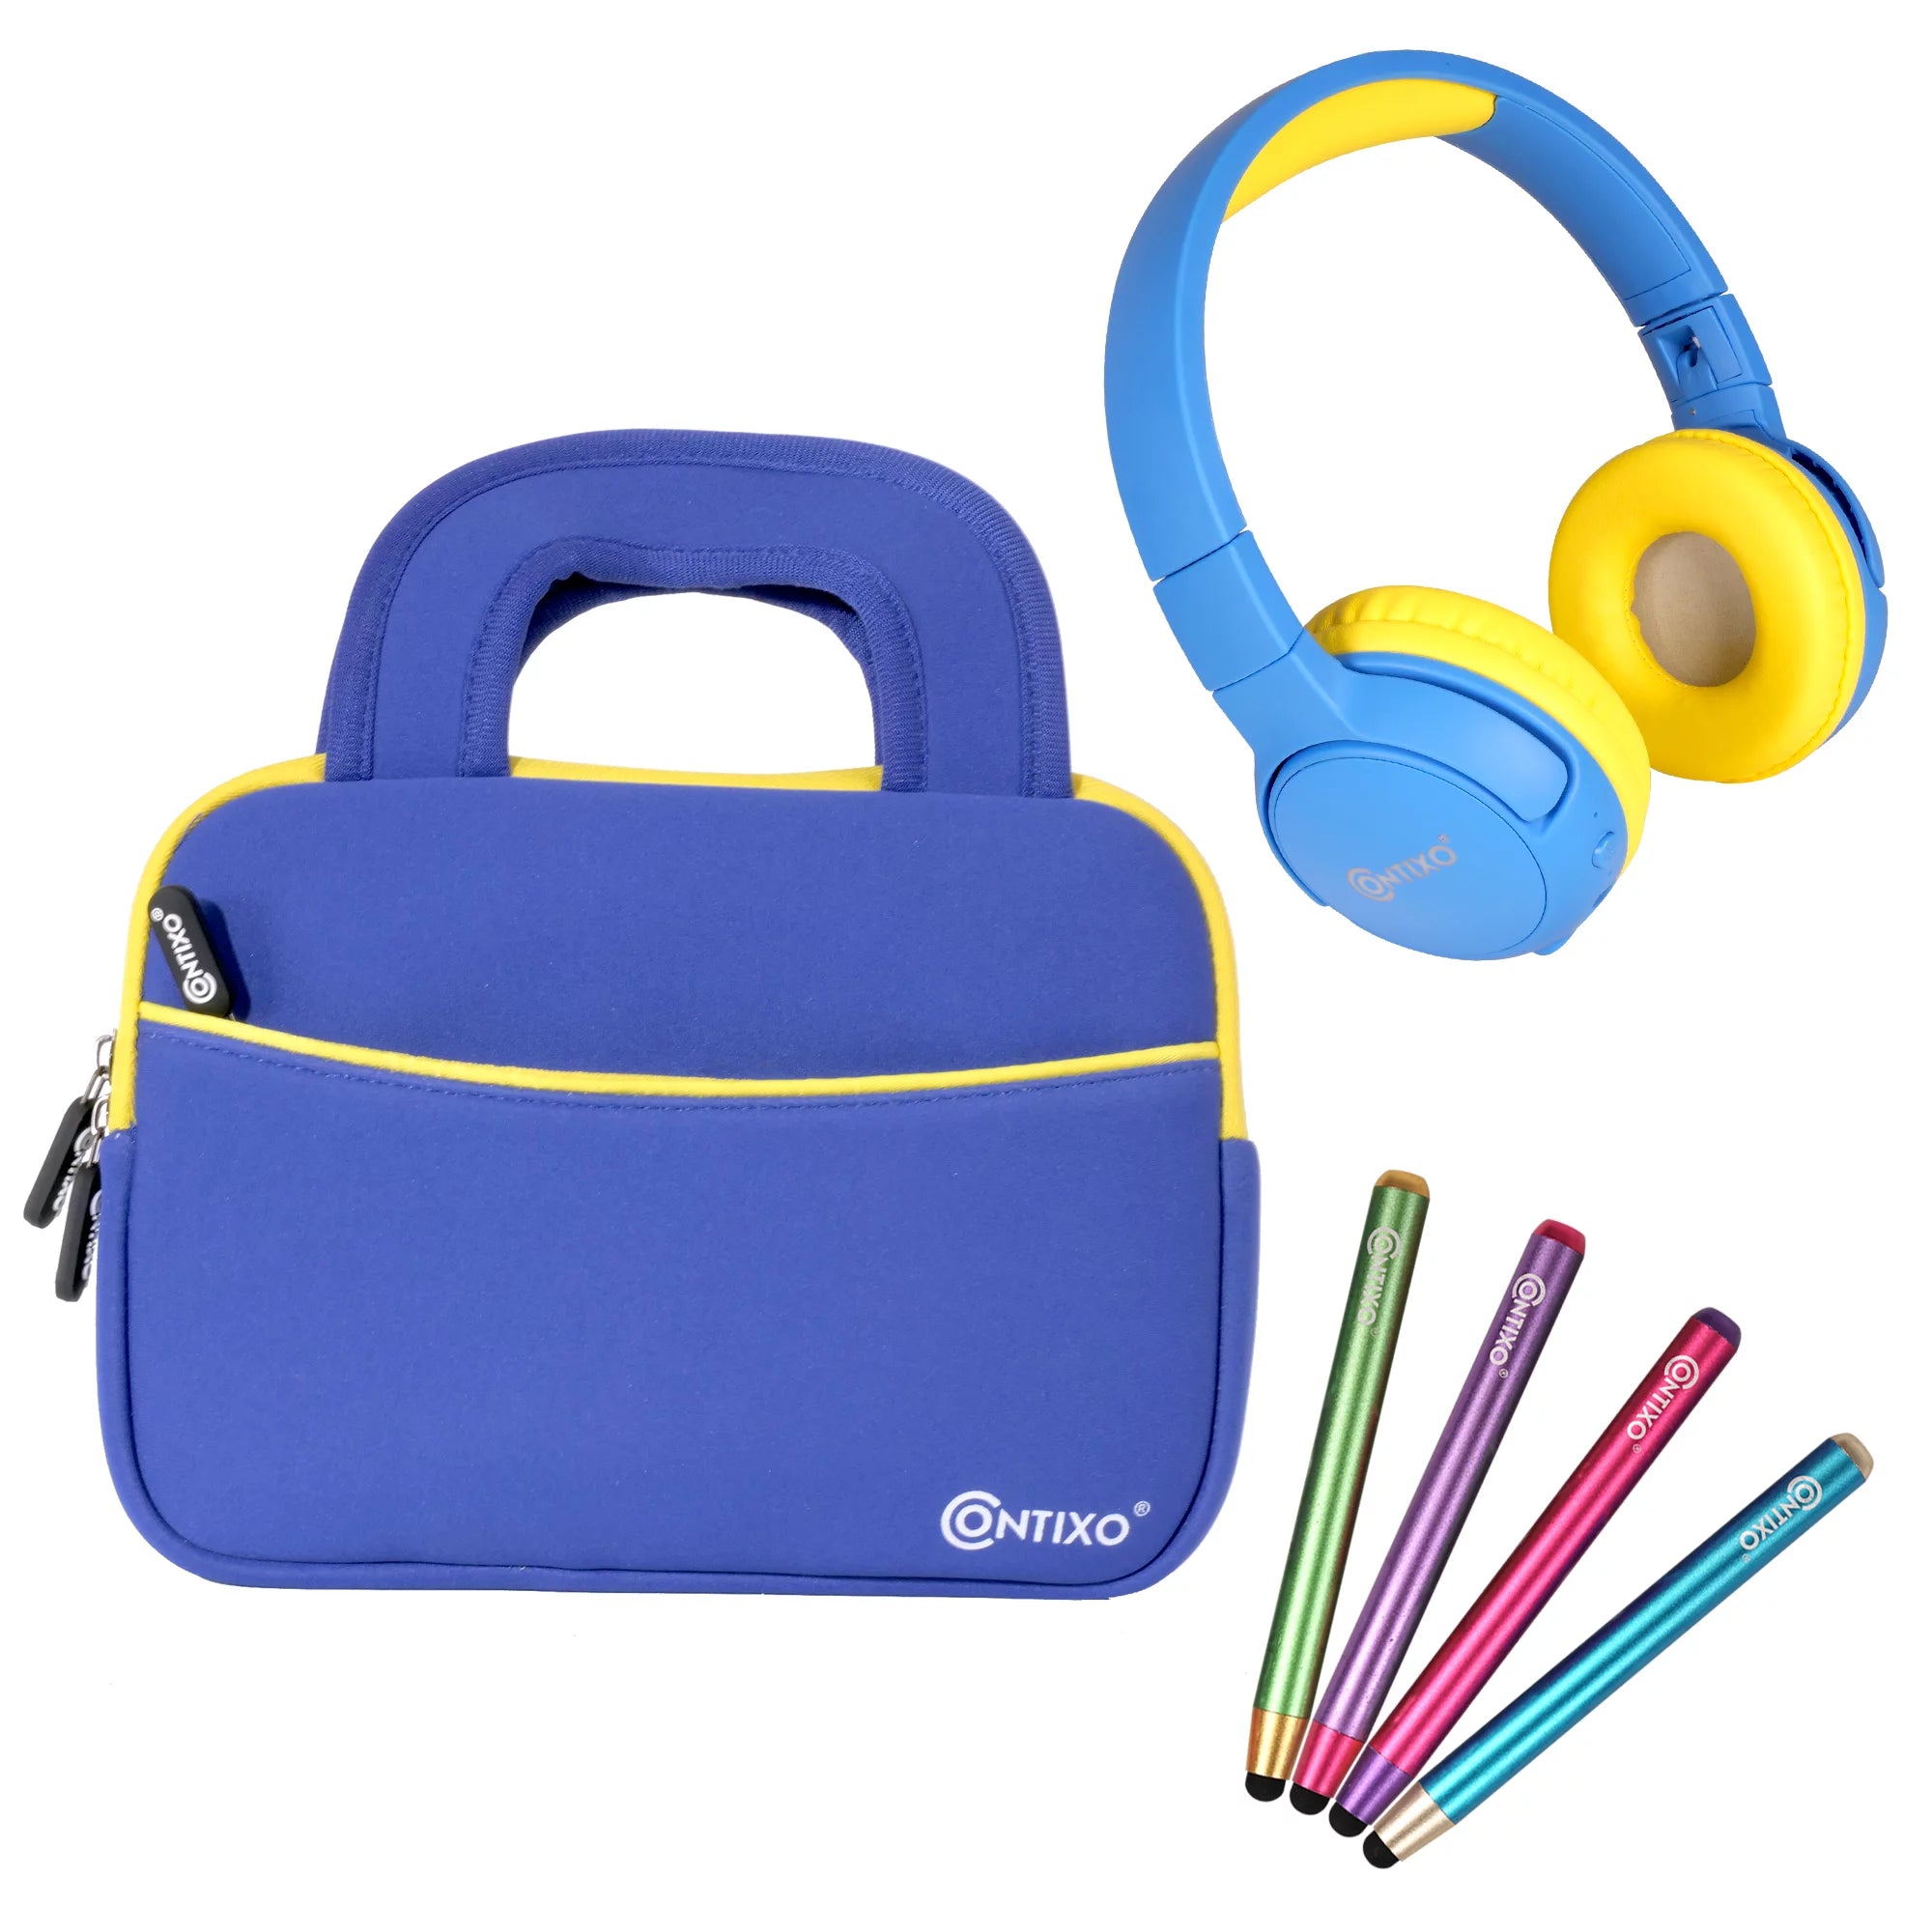 Contixo Kids Tablet Accessories Bundle -  Bluetooth Headphones, 4 Stylus Pens, and 10-inch Tablet Carrying Bag